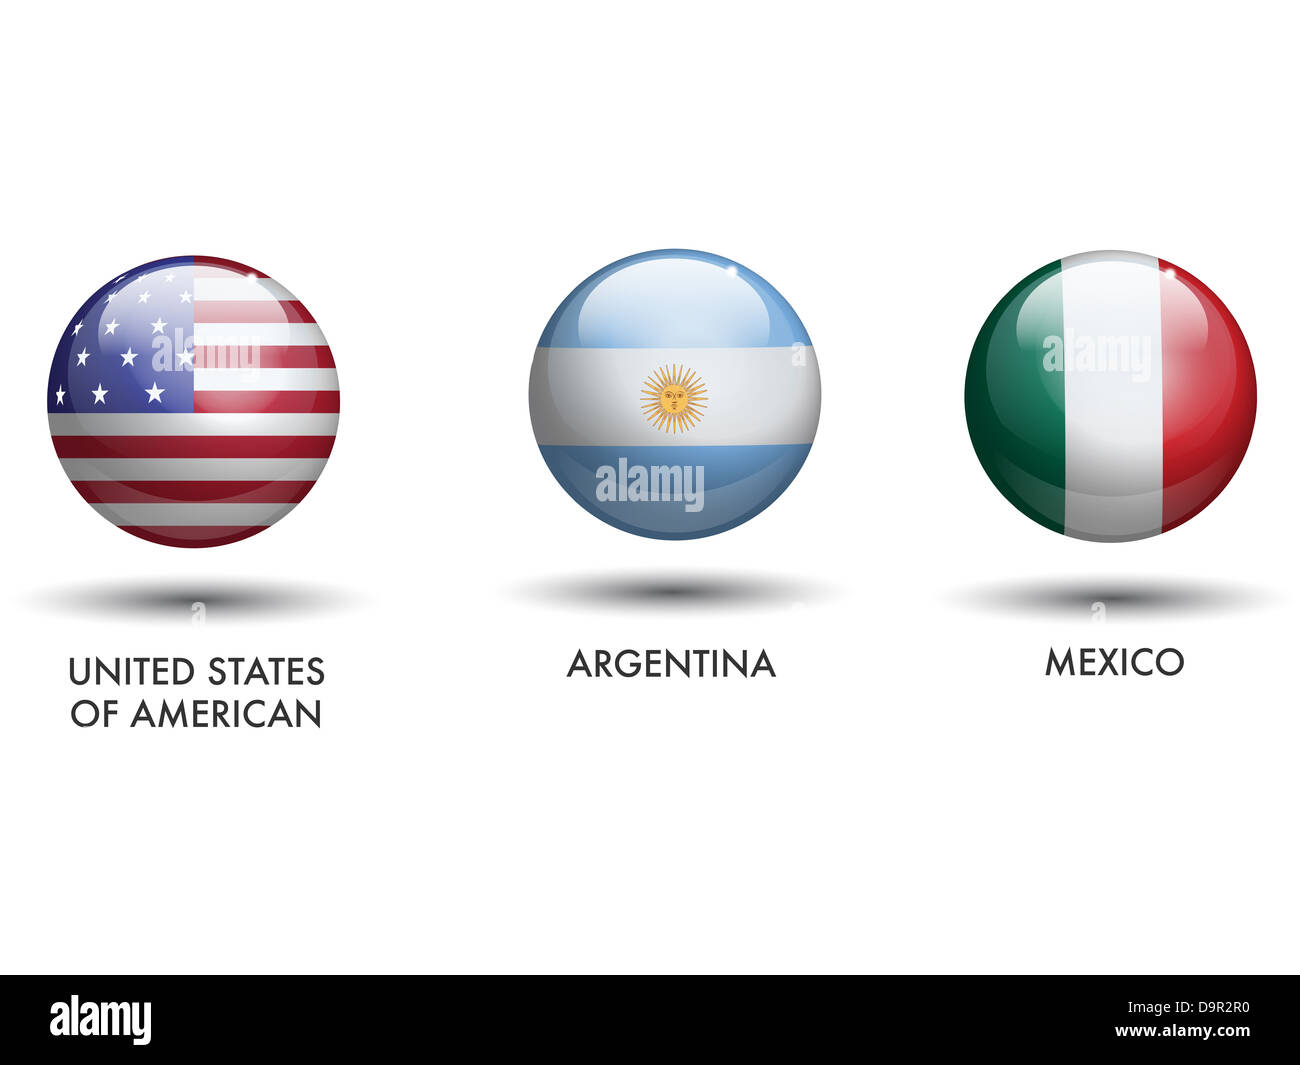 United States of America Argentina Mexico Flags as a Sphere Stock Photo